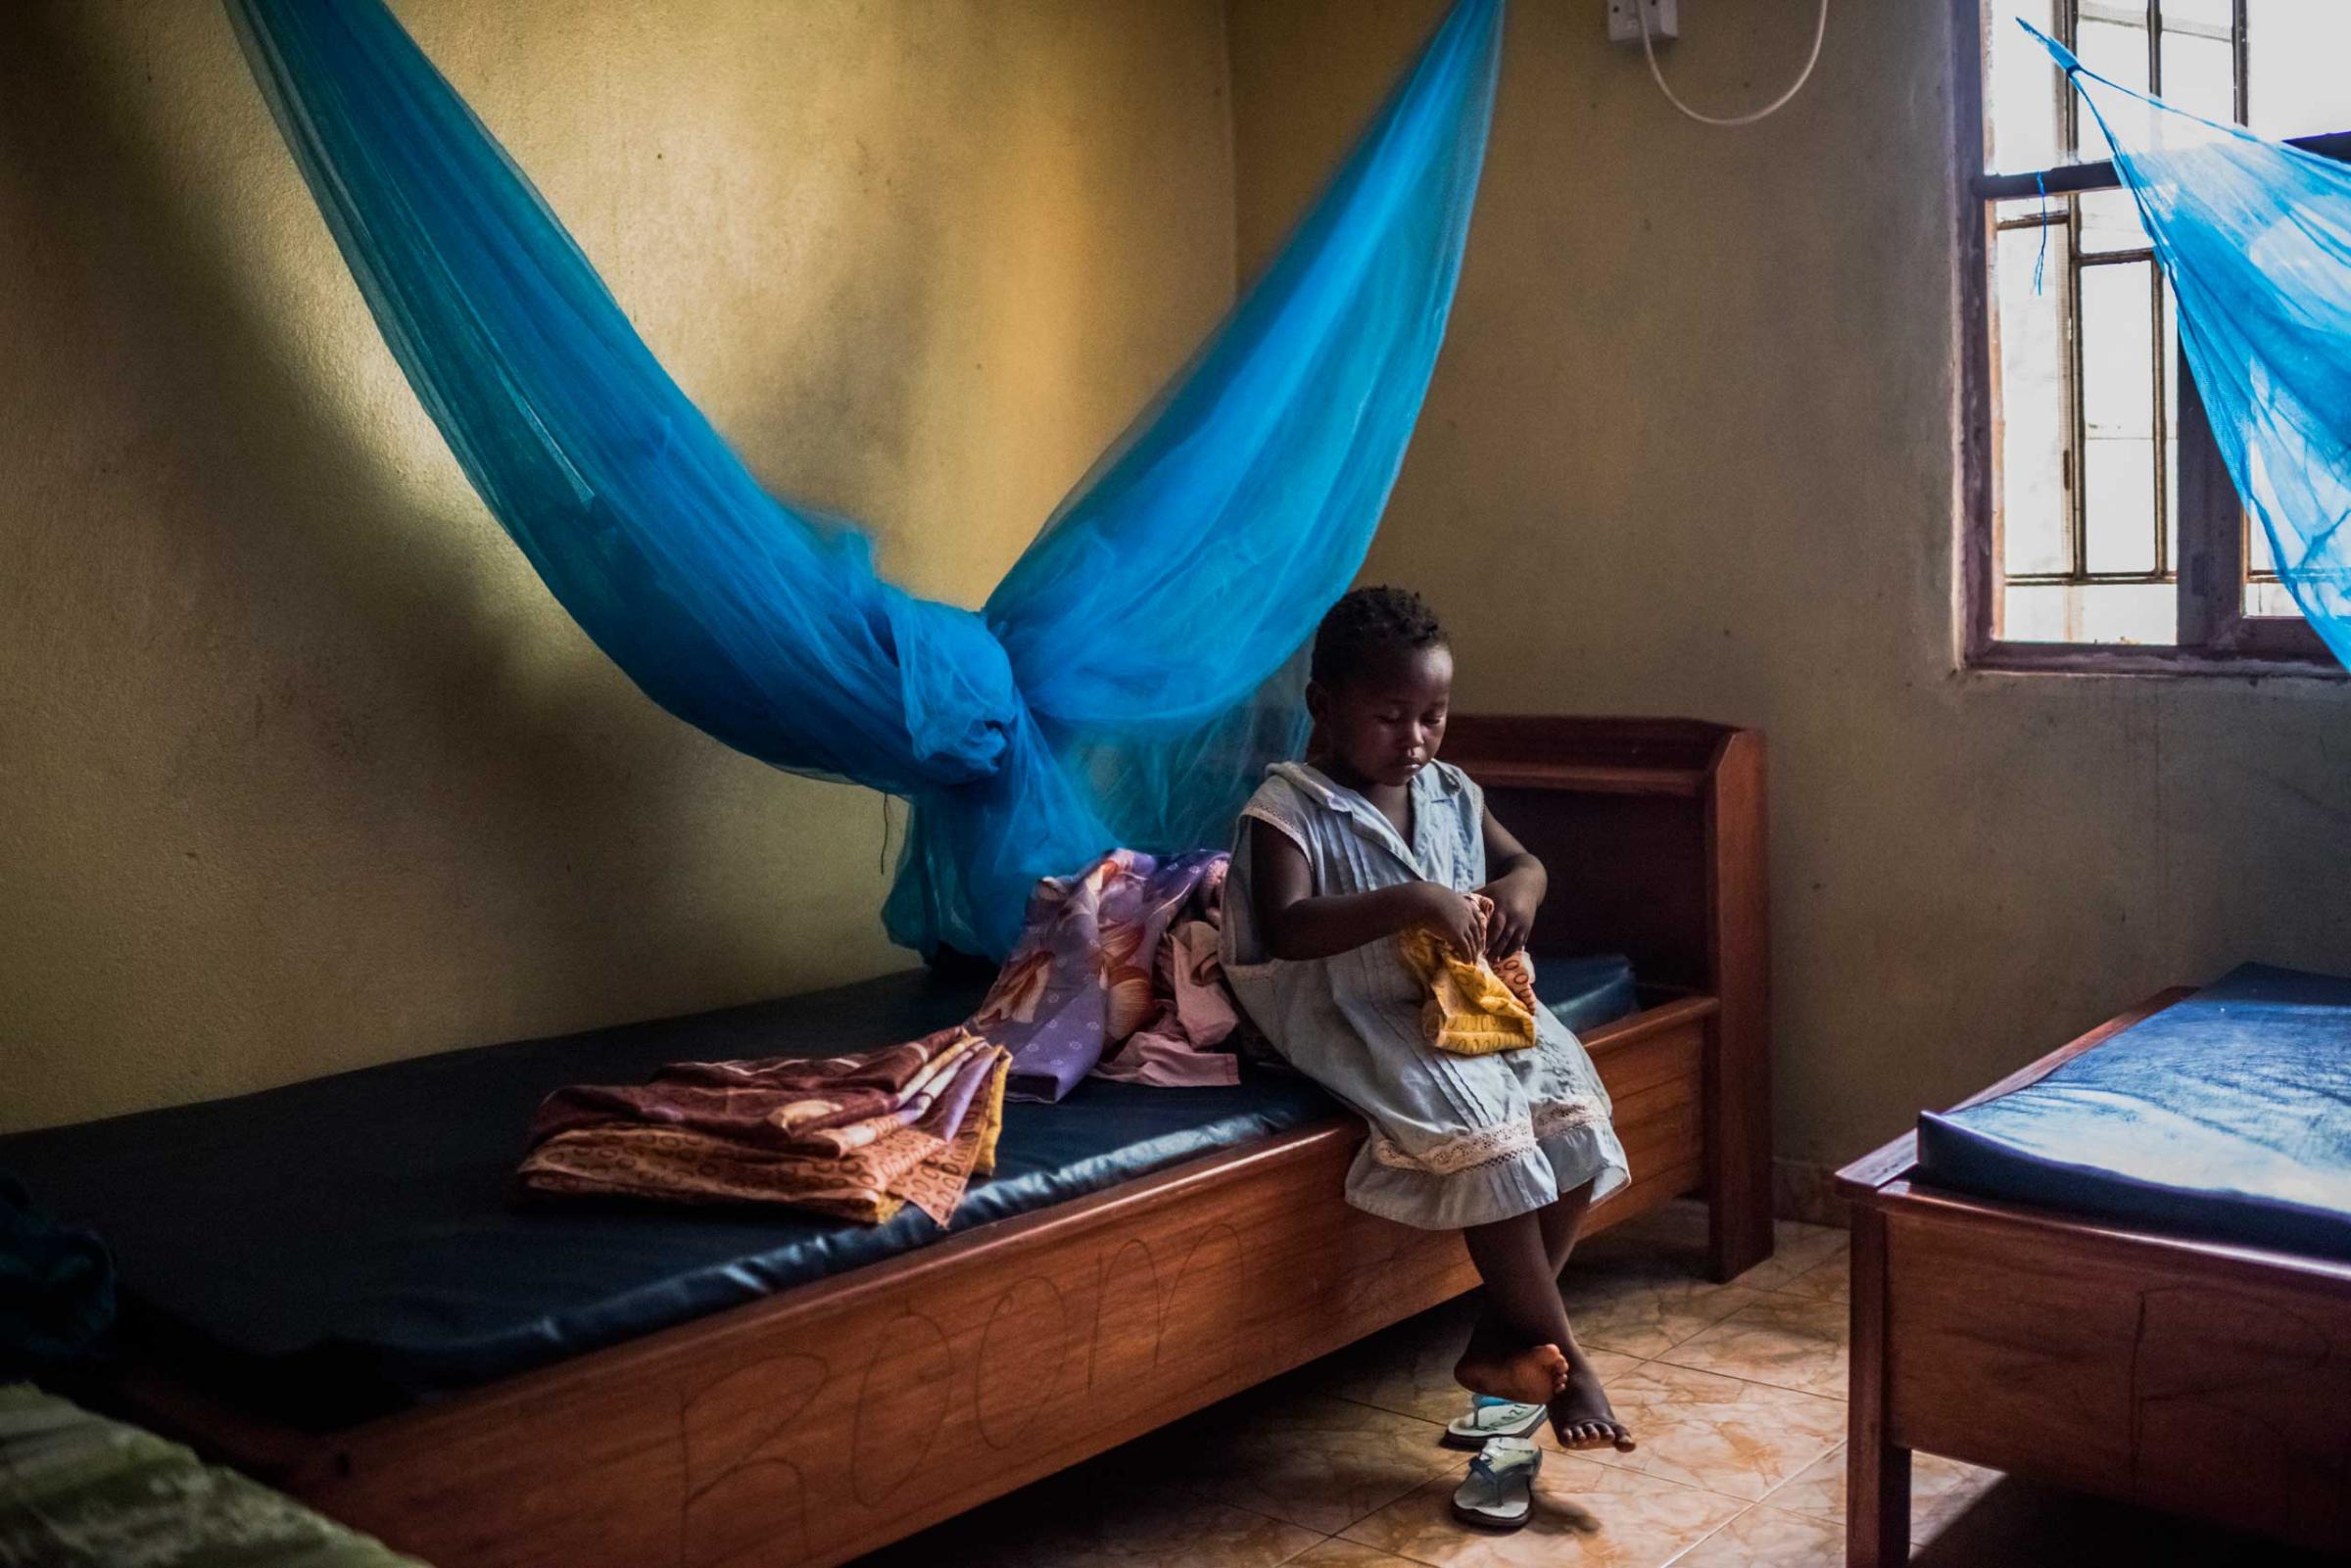 Sweetie Sweetie, believed to be 4, who was orphaned by Ebola, sits in her bedroom at the group home where she now lives in Port Loko, Sierra Leone.